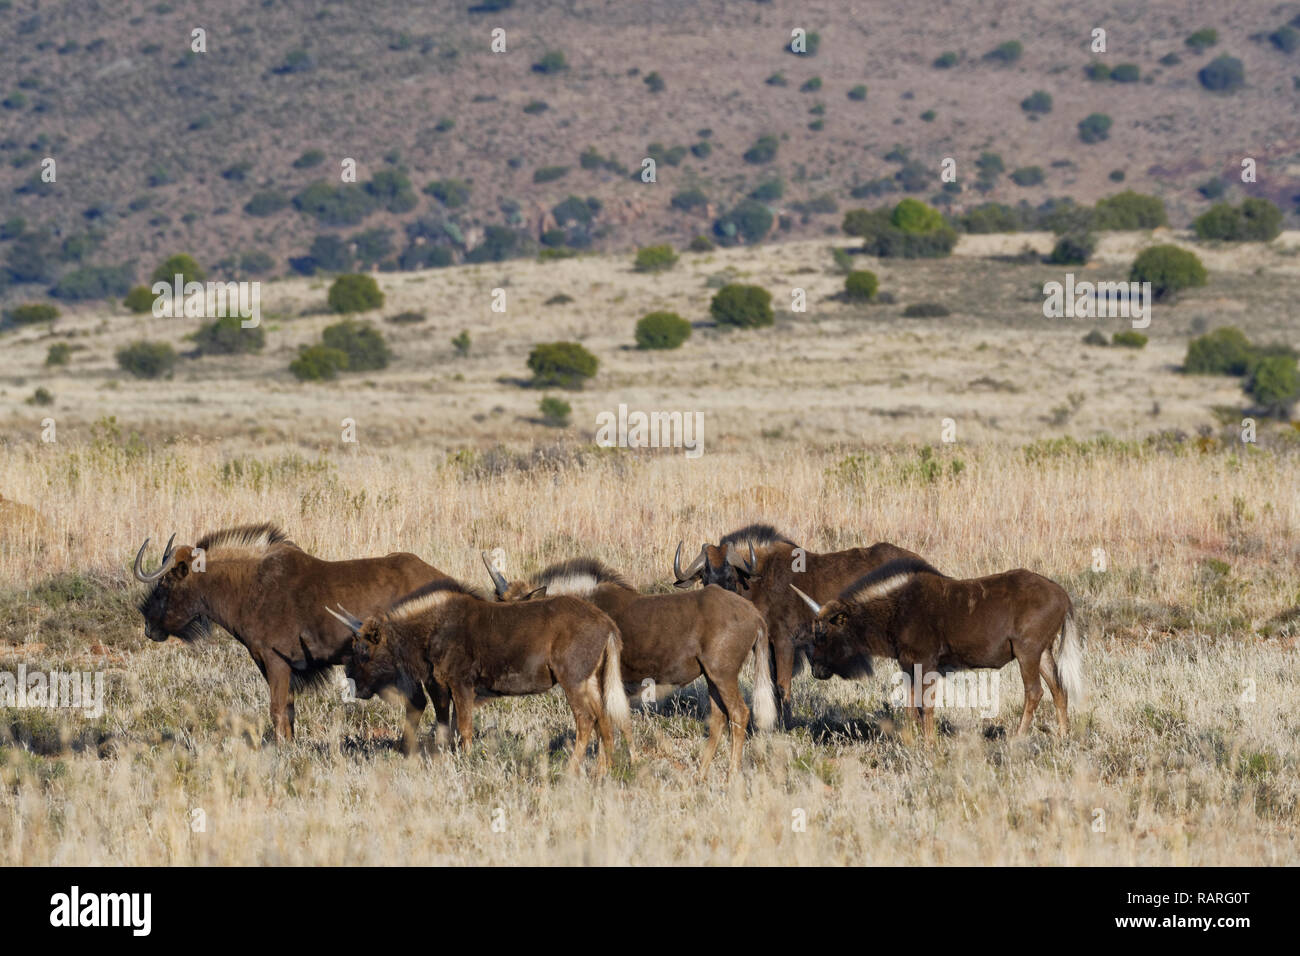 Black wildebeests (Connochaetes gnou), small herd, standing in open grassland, Mountain Zebra National Park, Eastern Cape, South Africa, Africa Stock Photo